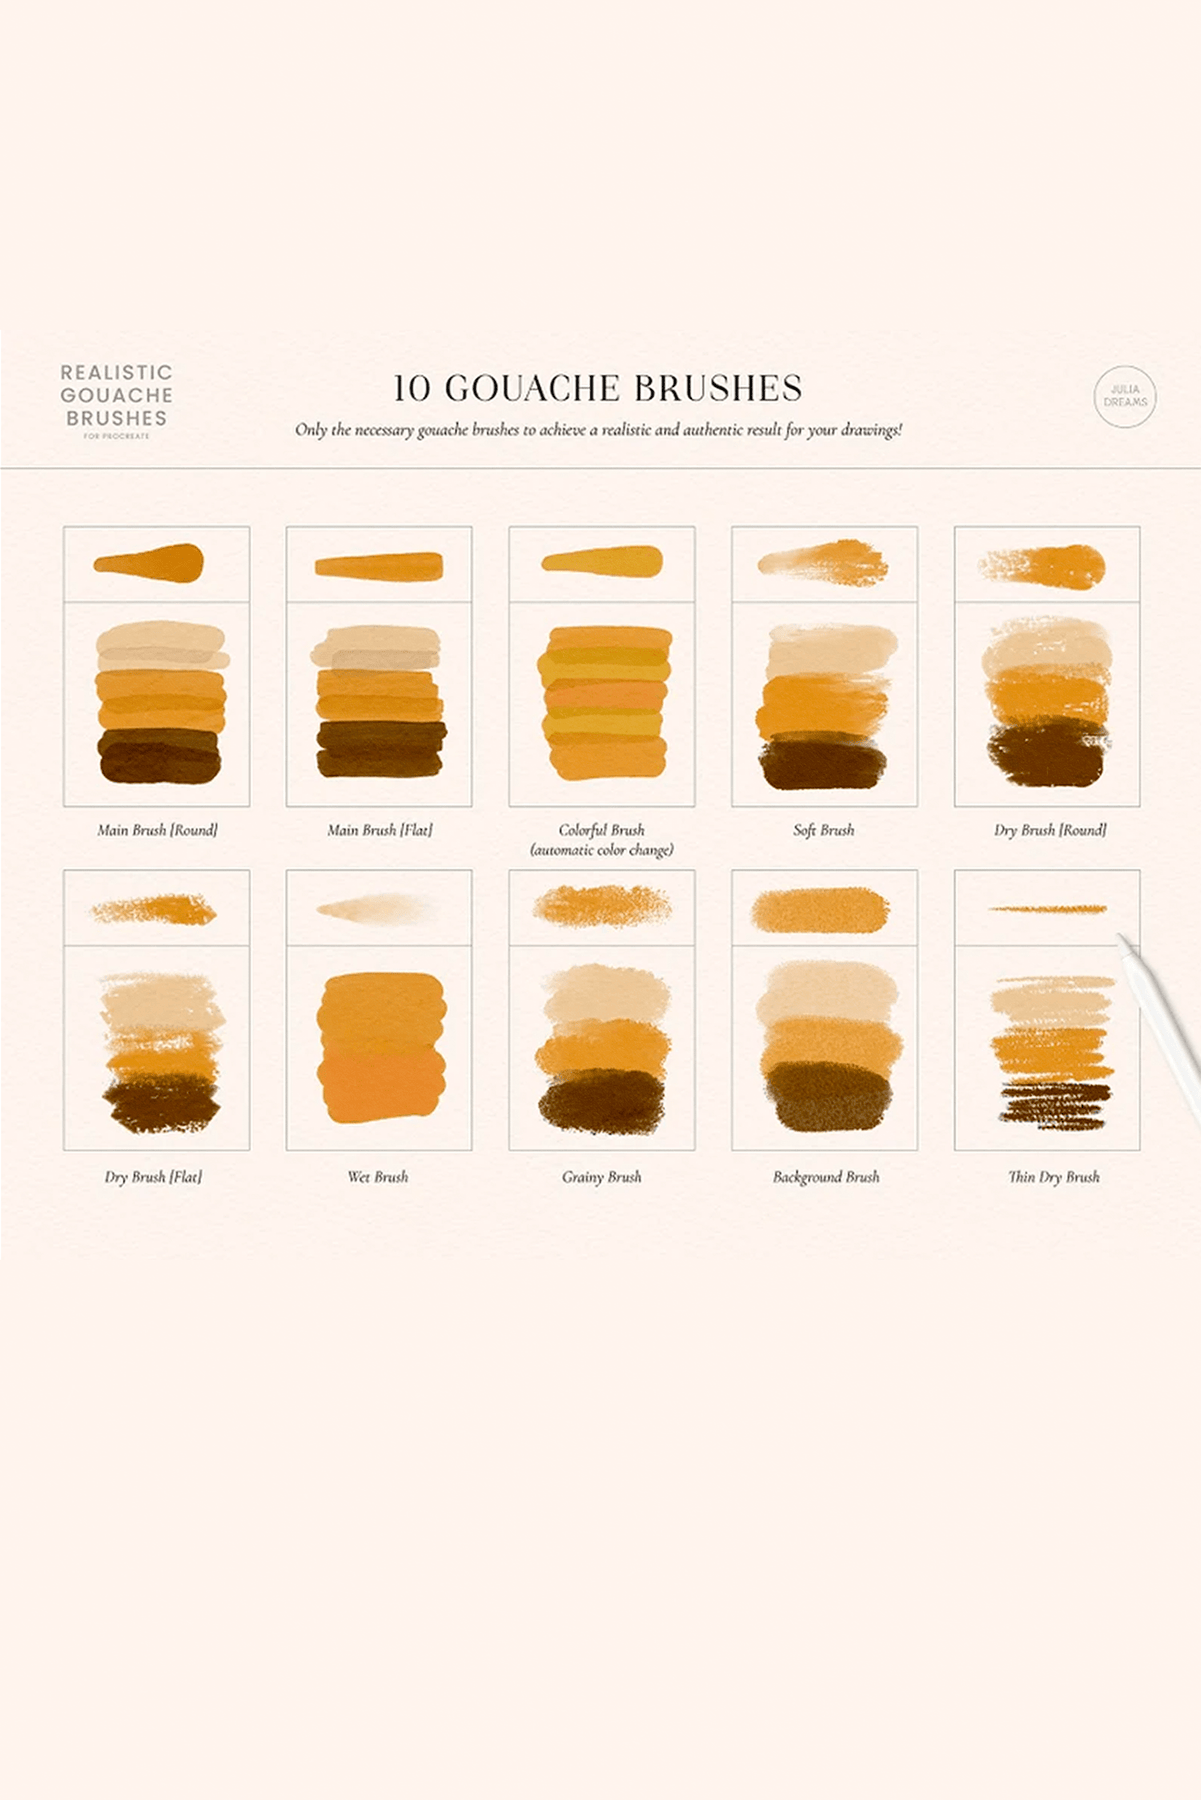 Realistic Gouache Brushes by Julia Dreams